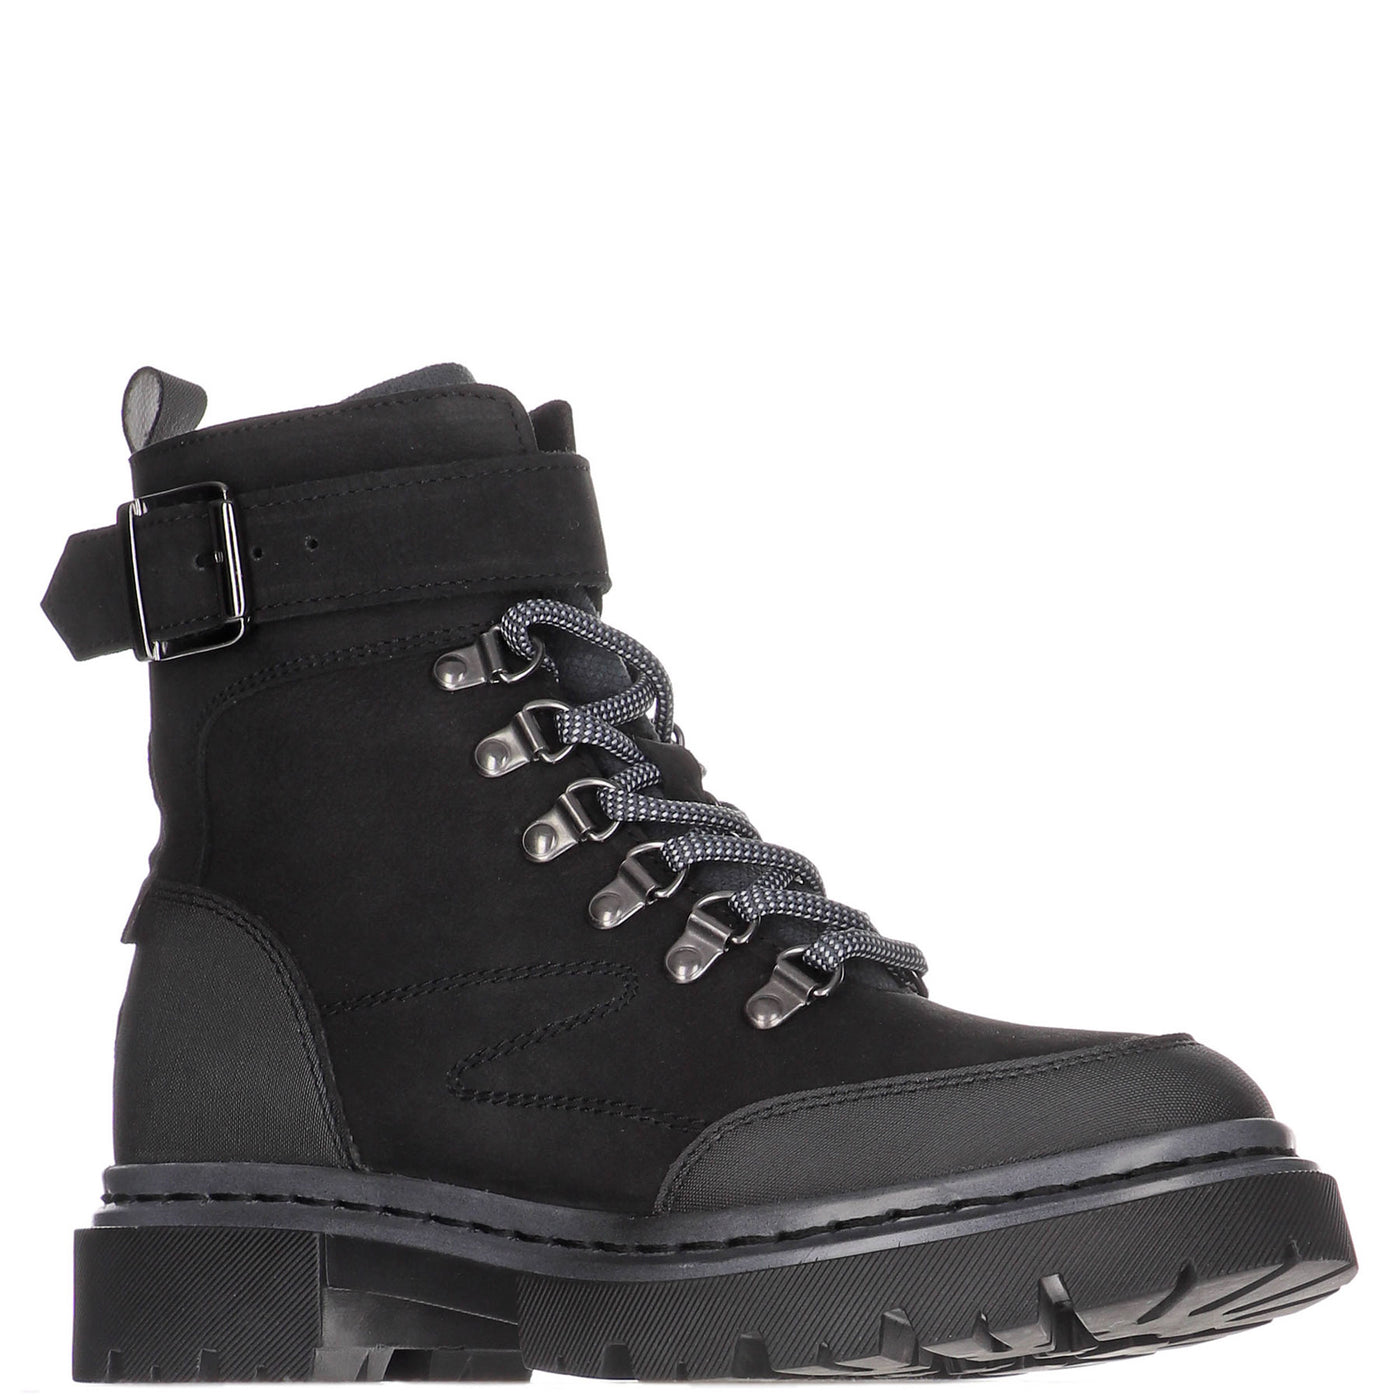 Remie Women's Lace-Up Boot